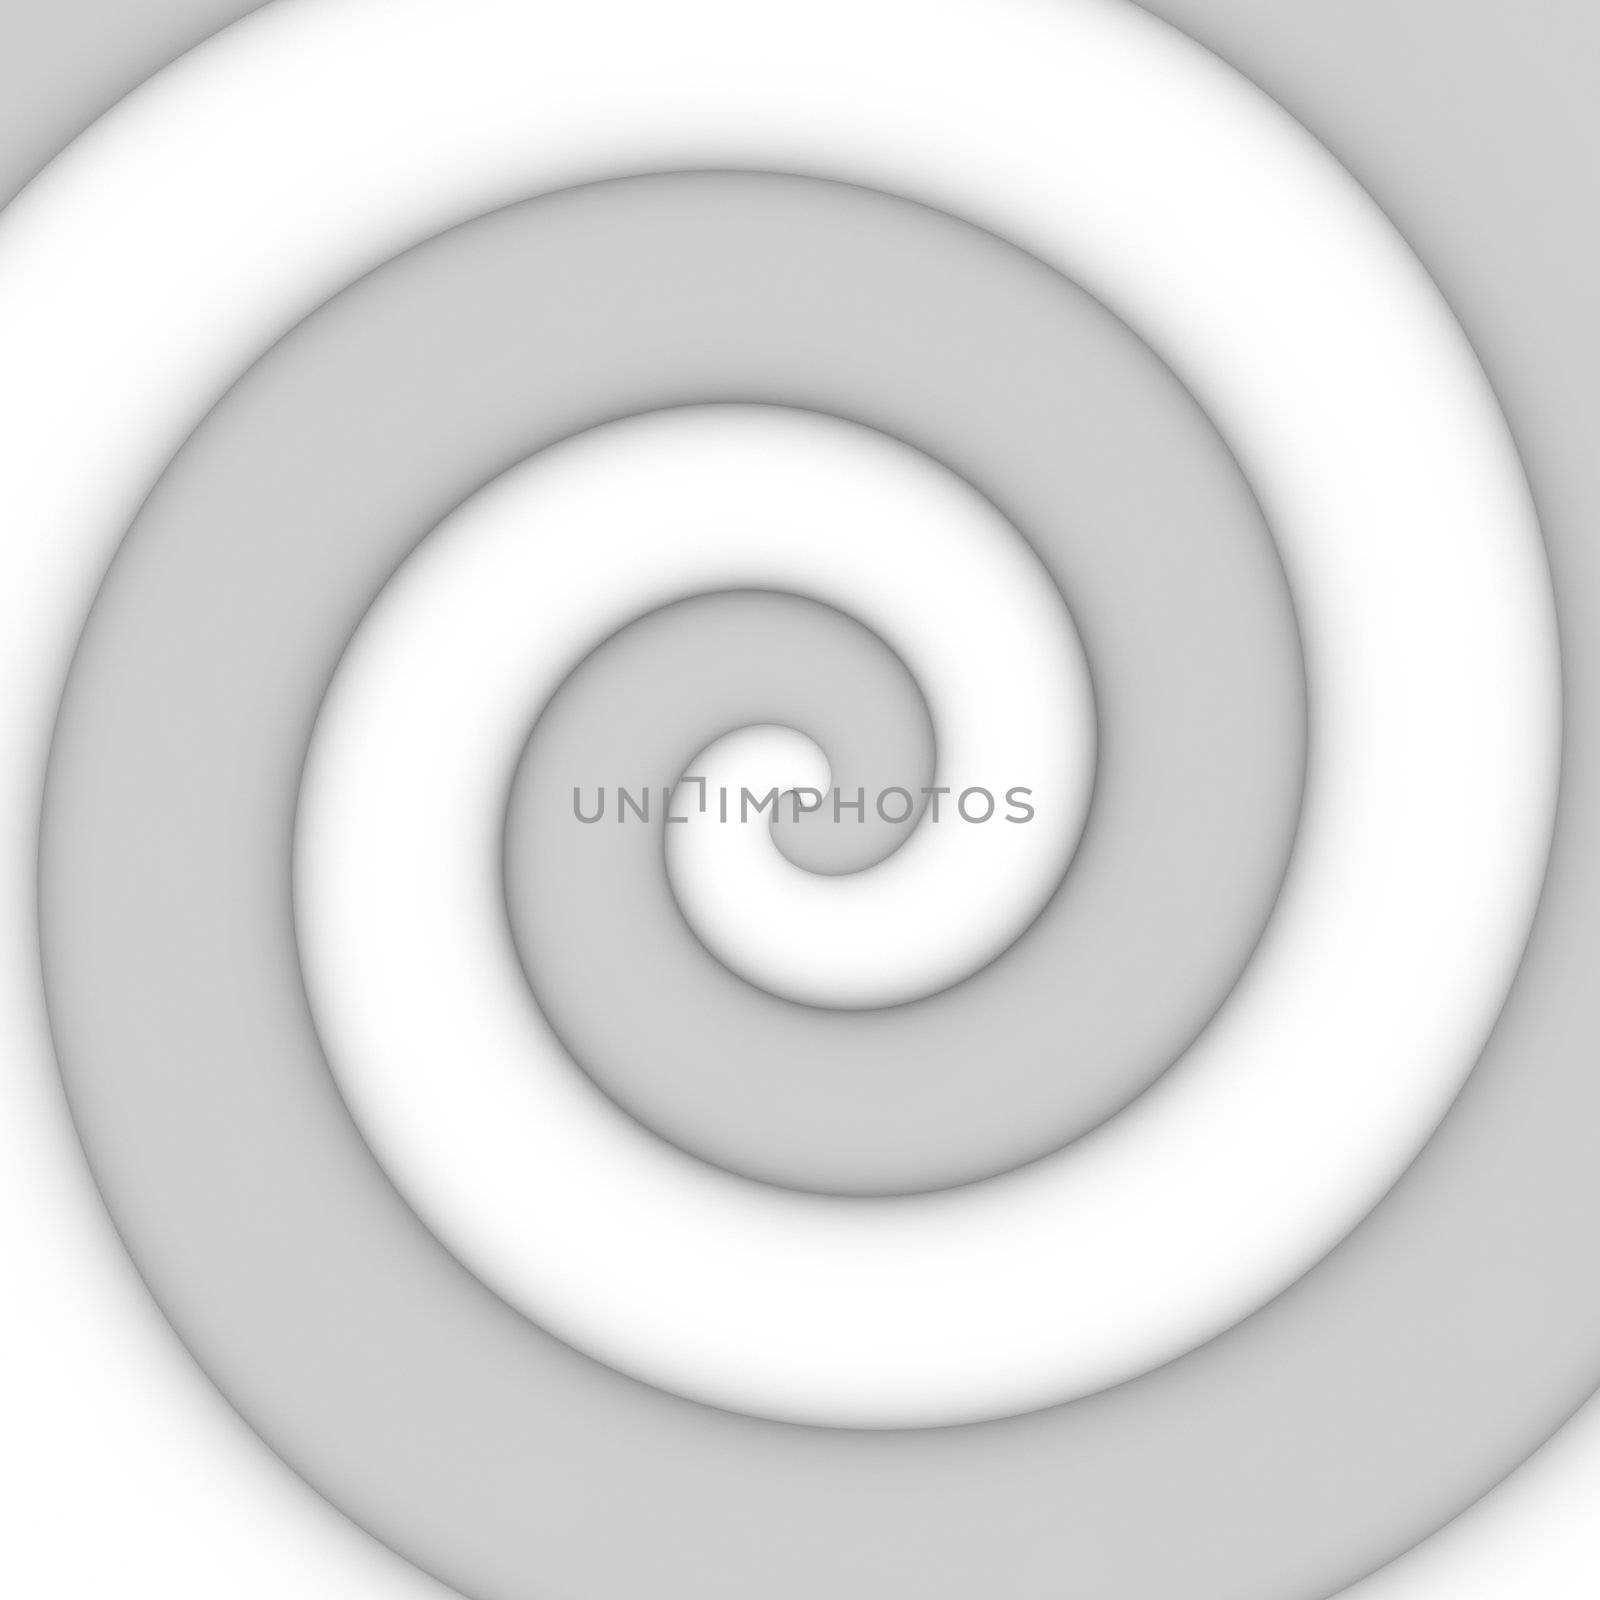 Abstract background of gray spiral swirl